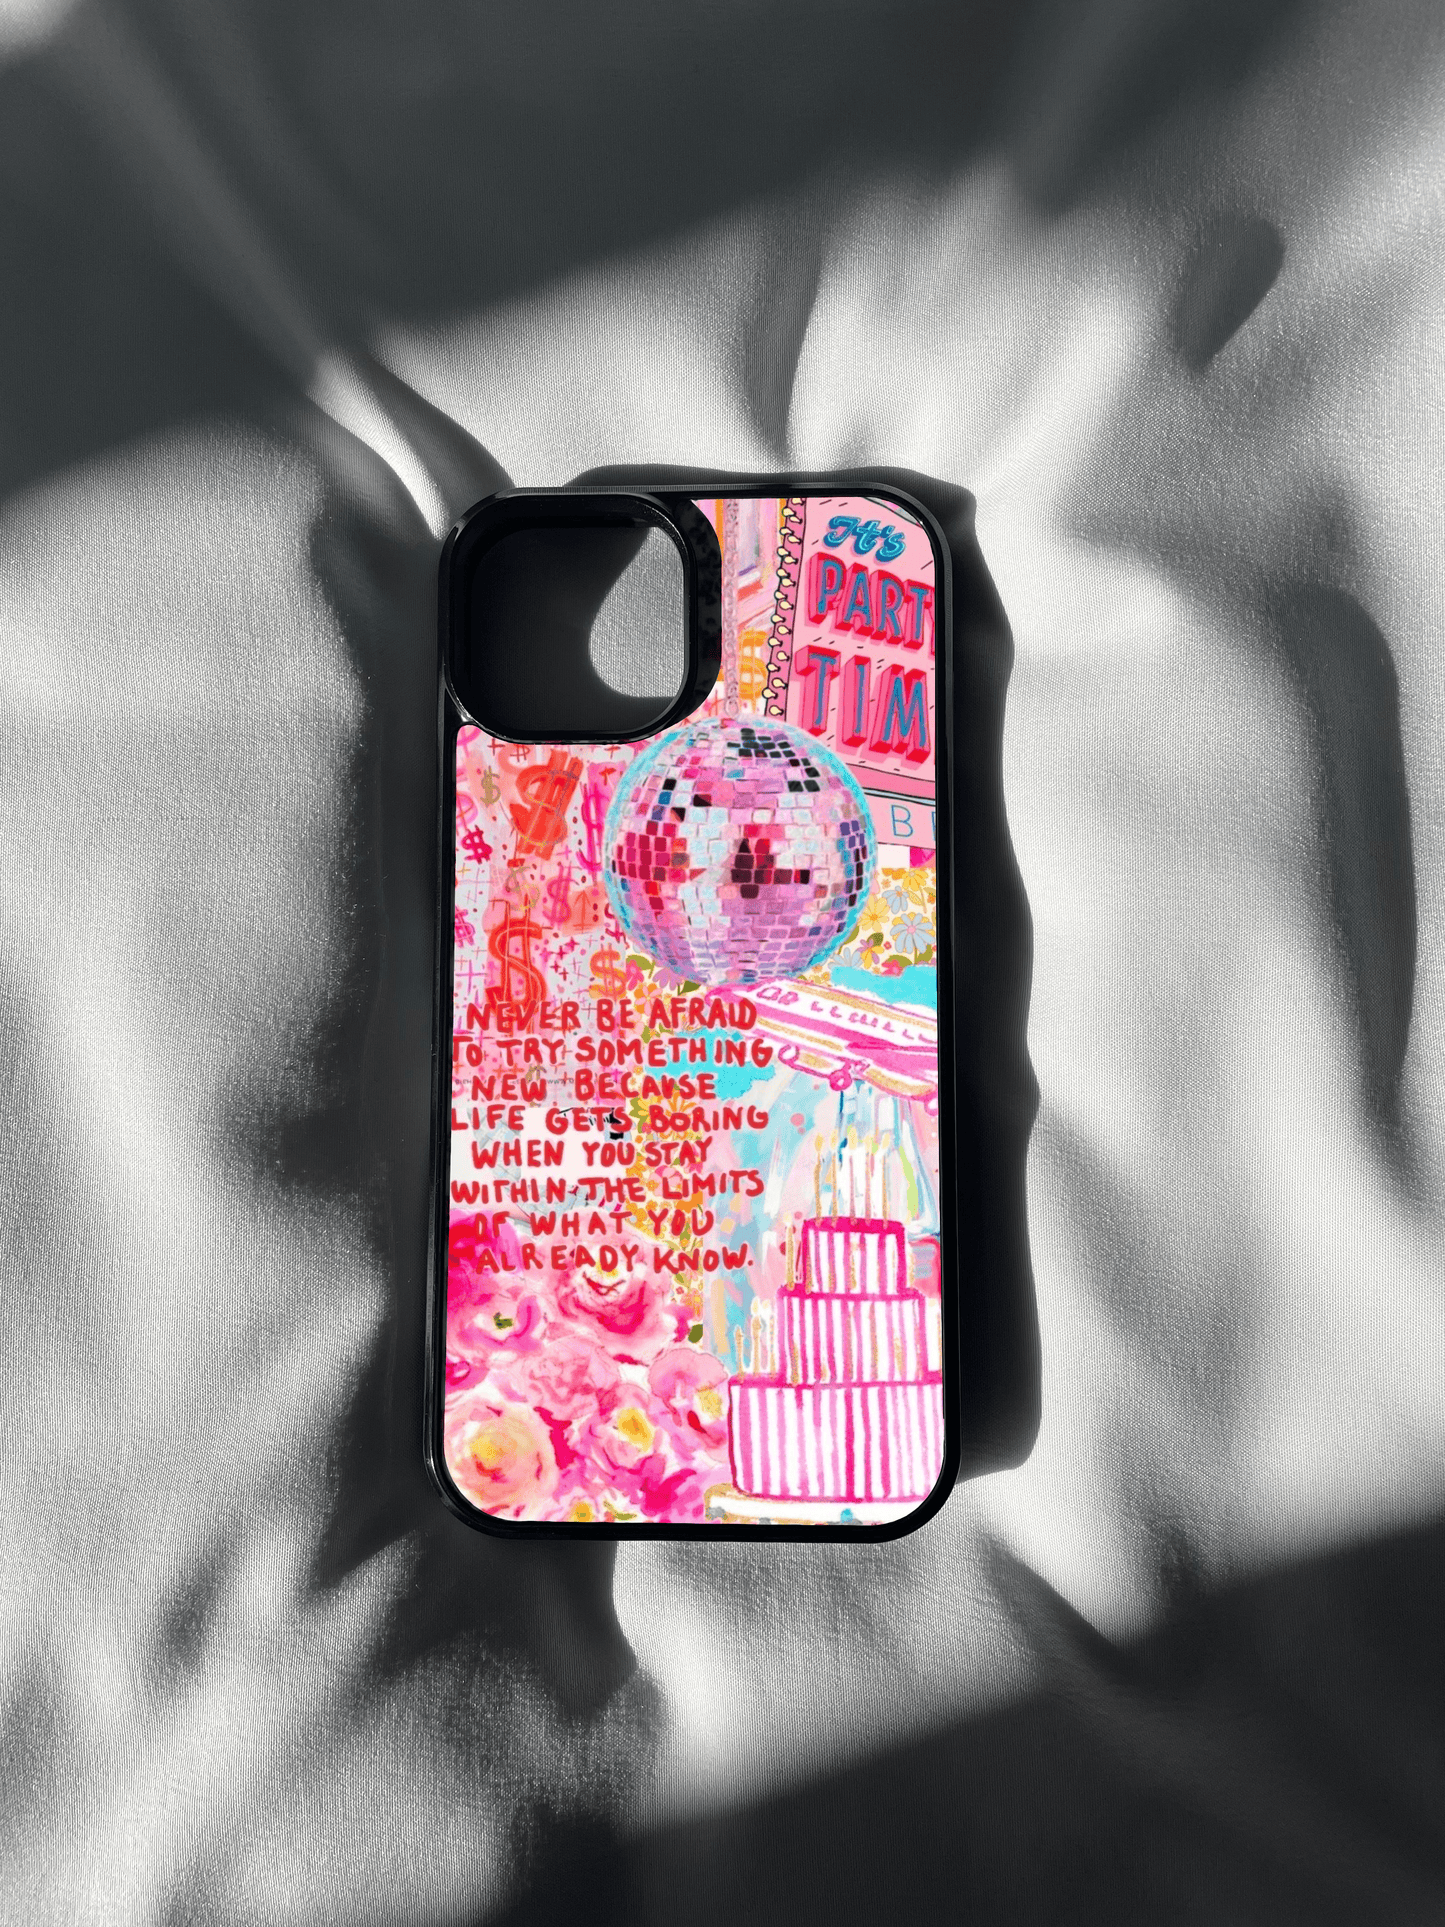 LIMITED EDITION Preppy pink pattern IPhone case